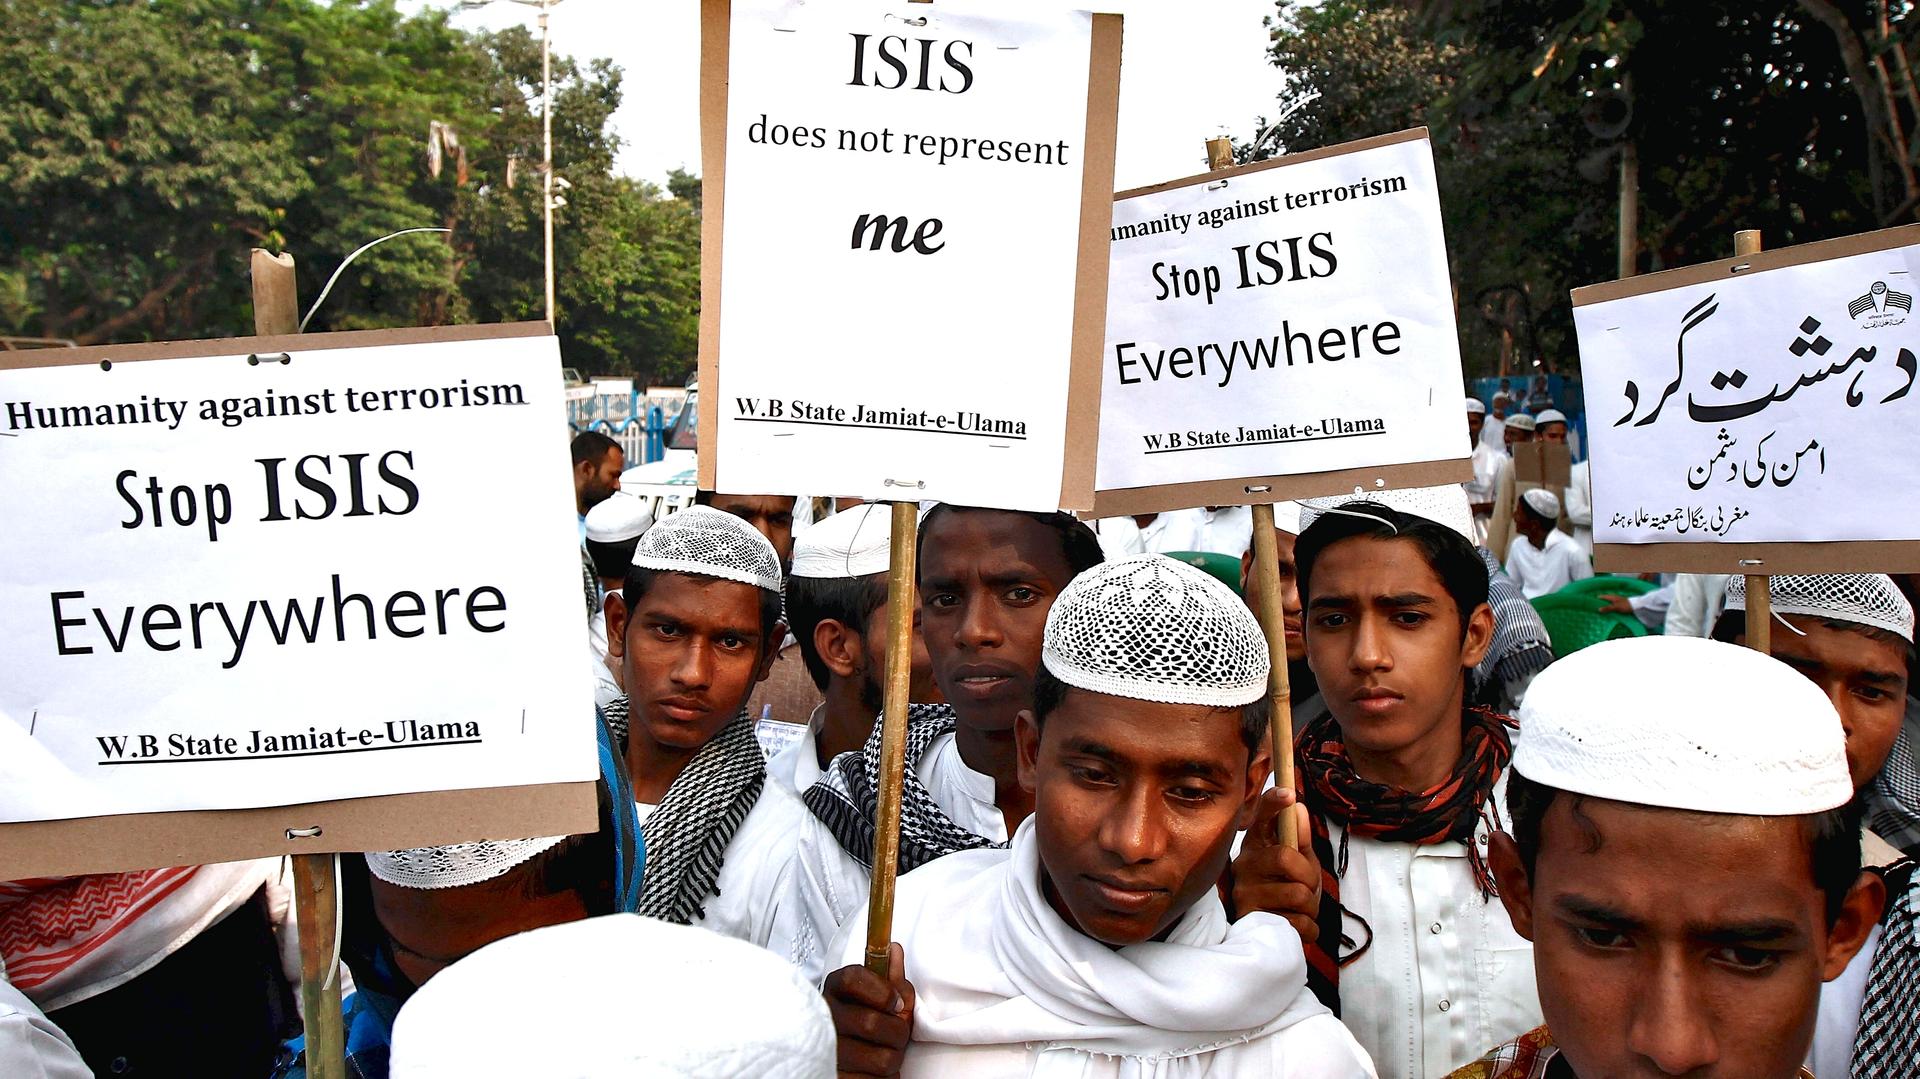 Activists from a Muslim group hold placards during a protest rally against the Paris attacks, in Kolkata, India on November 18, 2015.